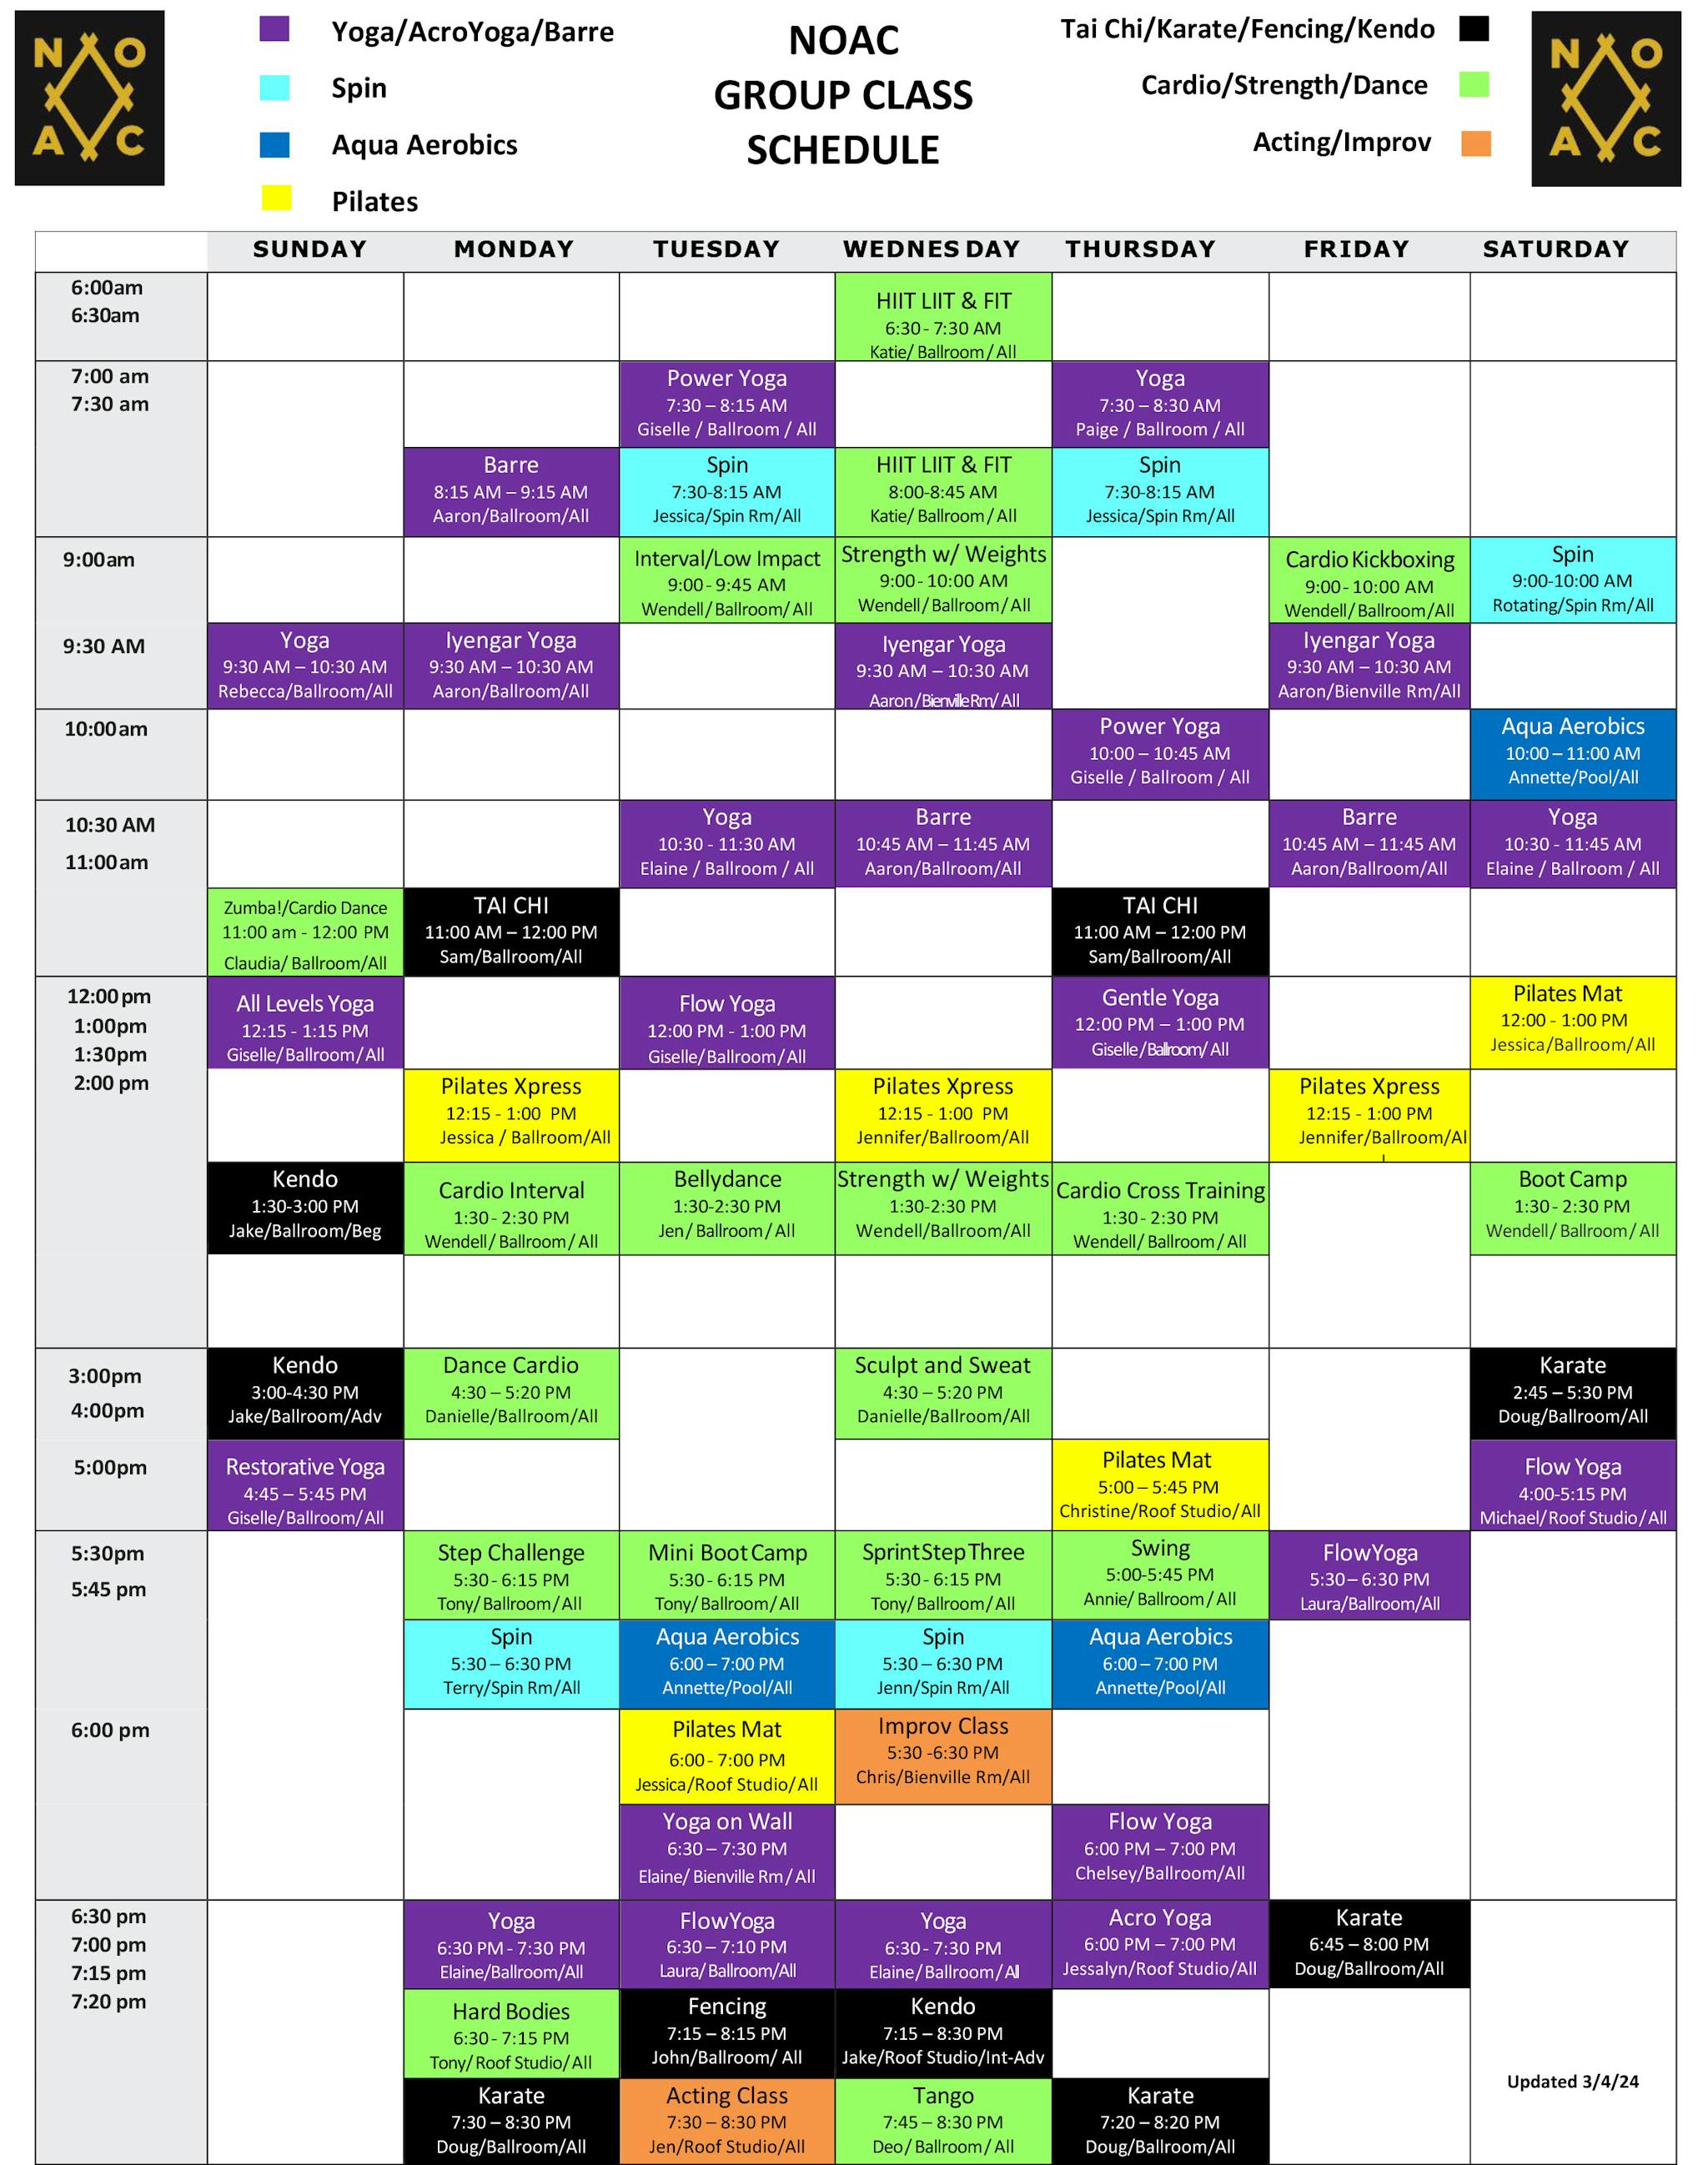 group class schedule